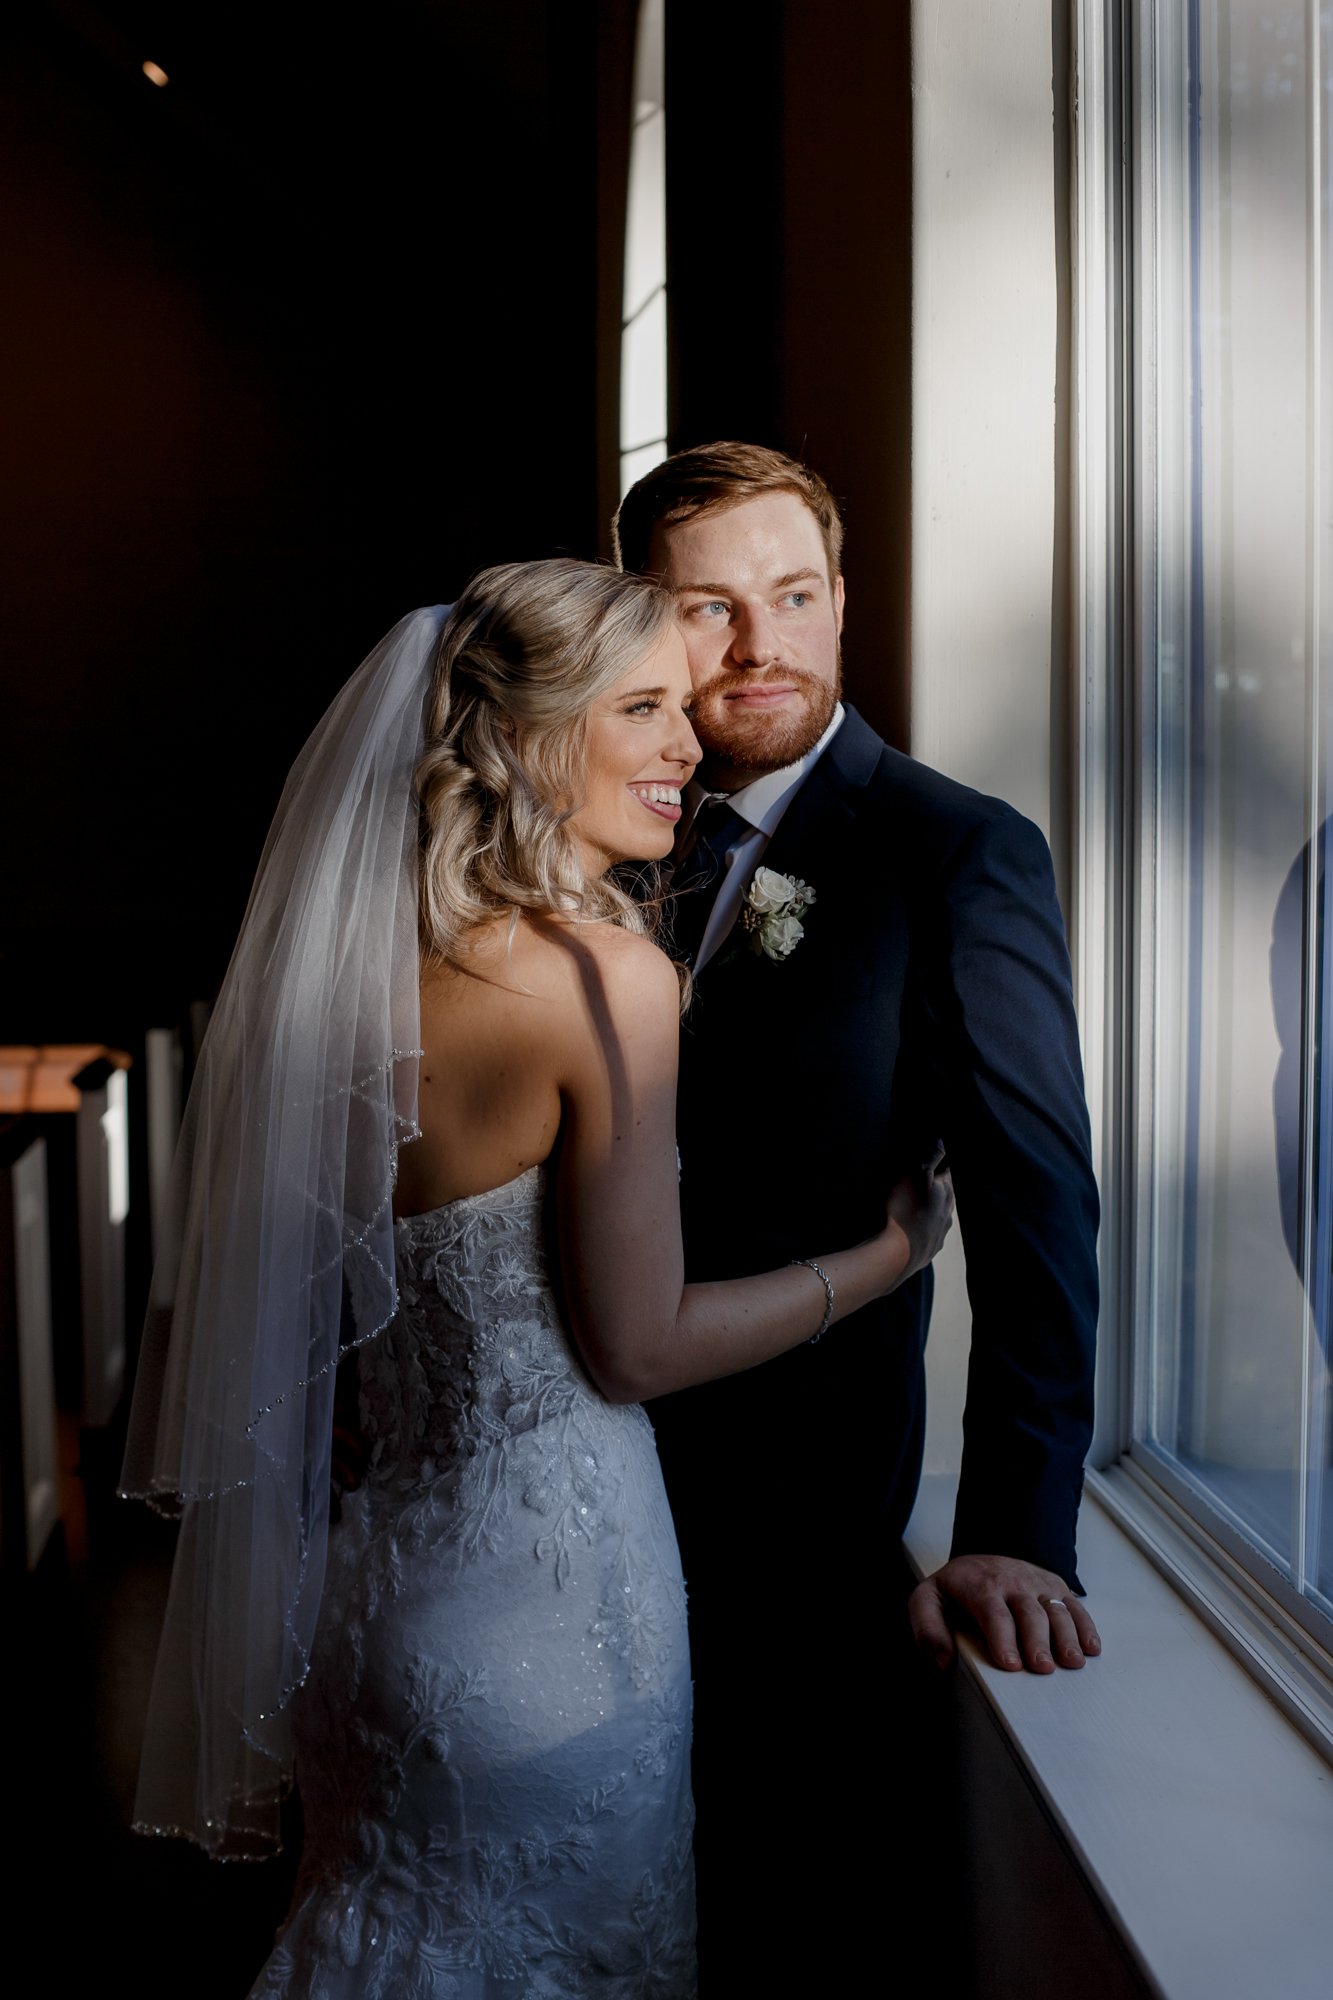 Bride and groom moody portraits in the chapel by the window. Wedding at The Vine (New Ulm, TX)